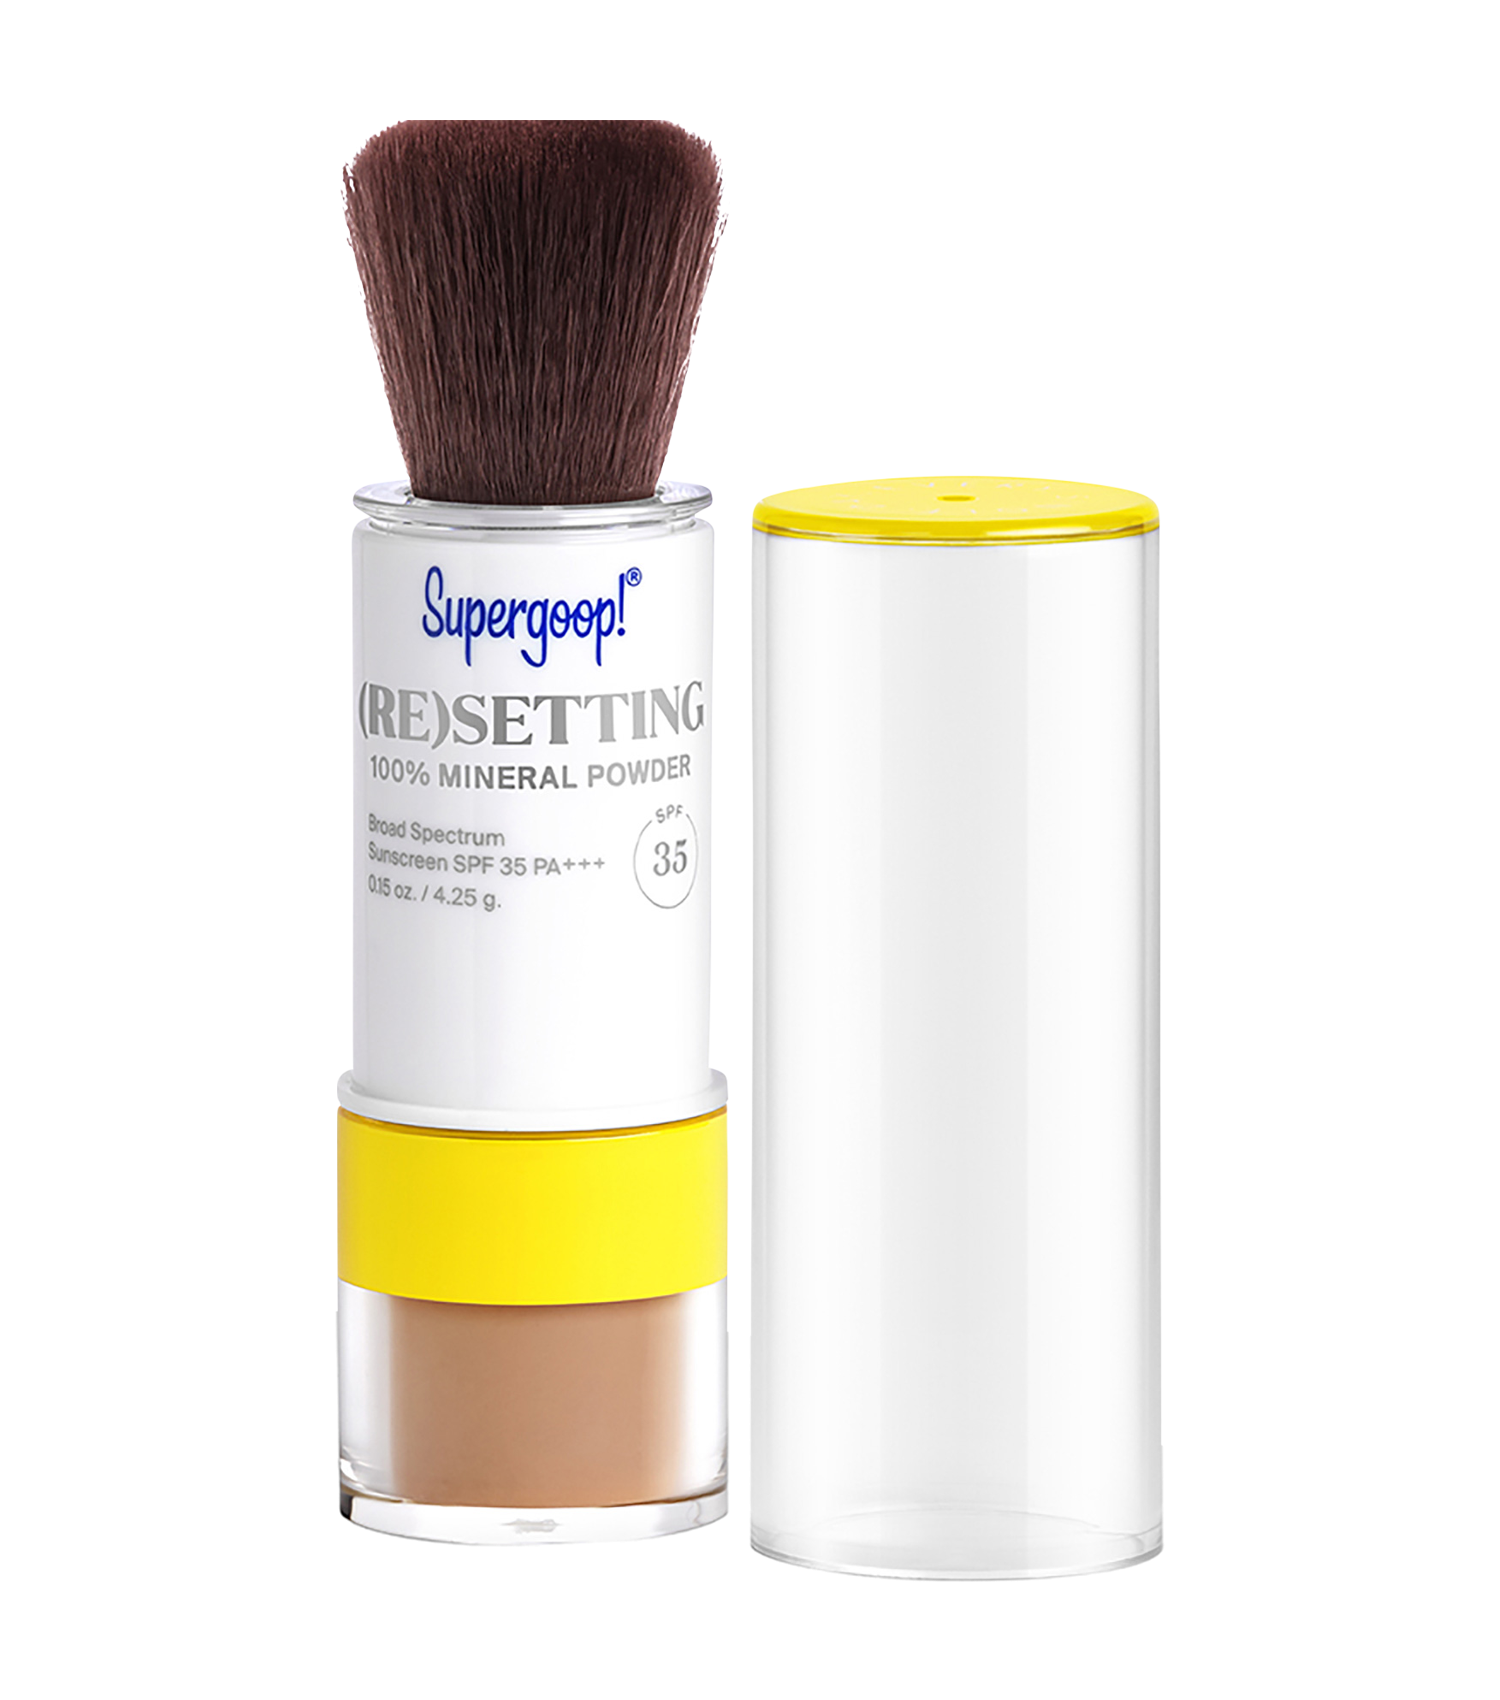 Supergoop! (Re)setting 100% Mineral Powder PA+++ SPF 35  1